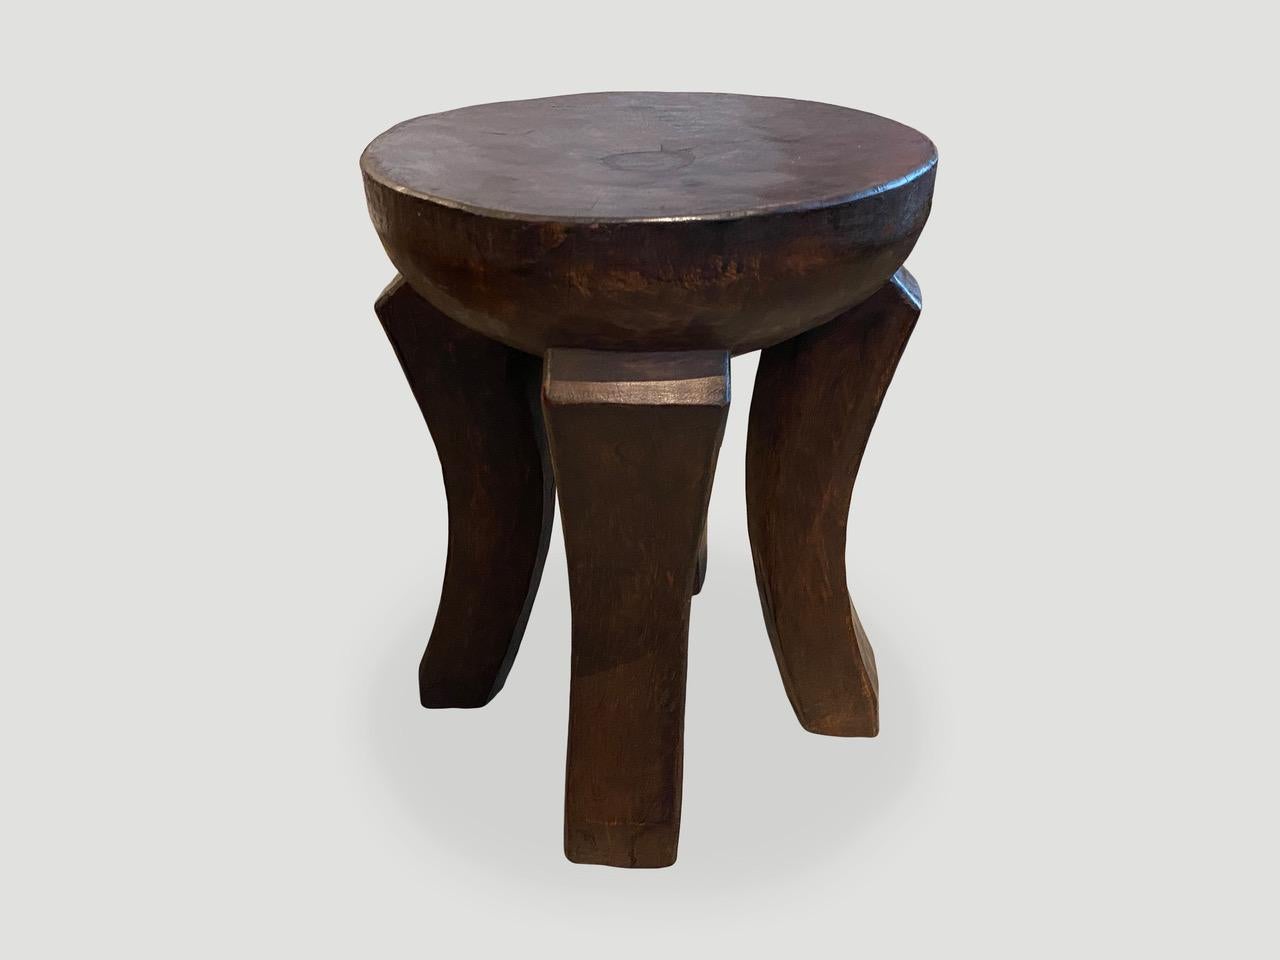 Andrianna Shamaris African Side Table or Stool